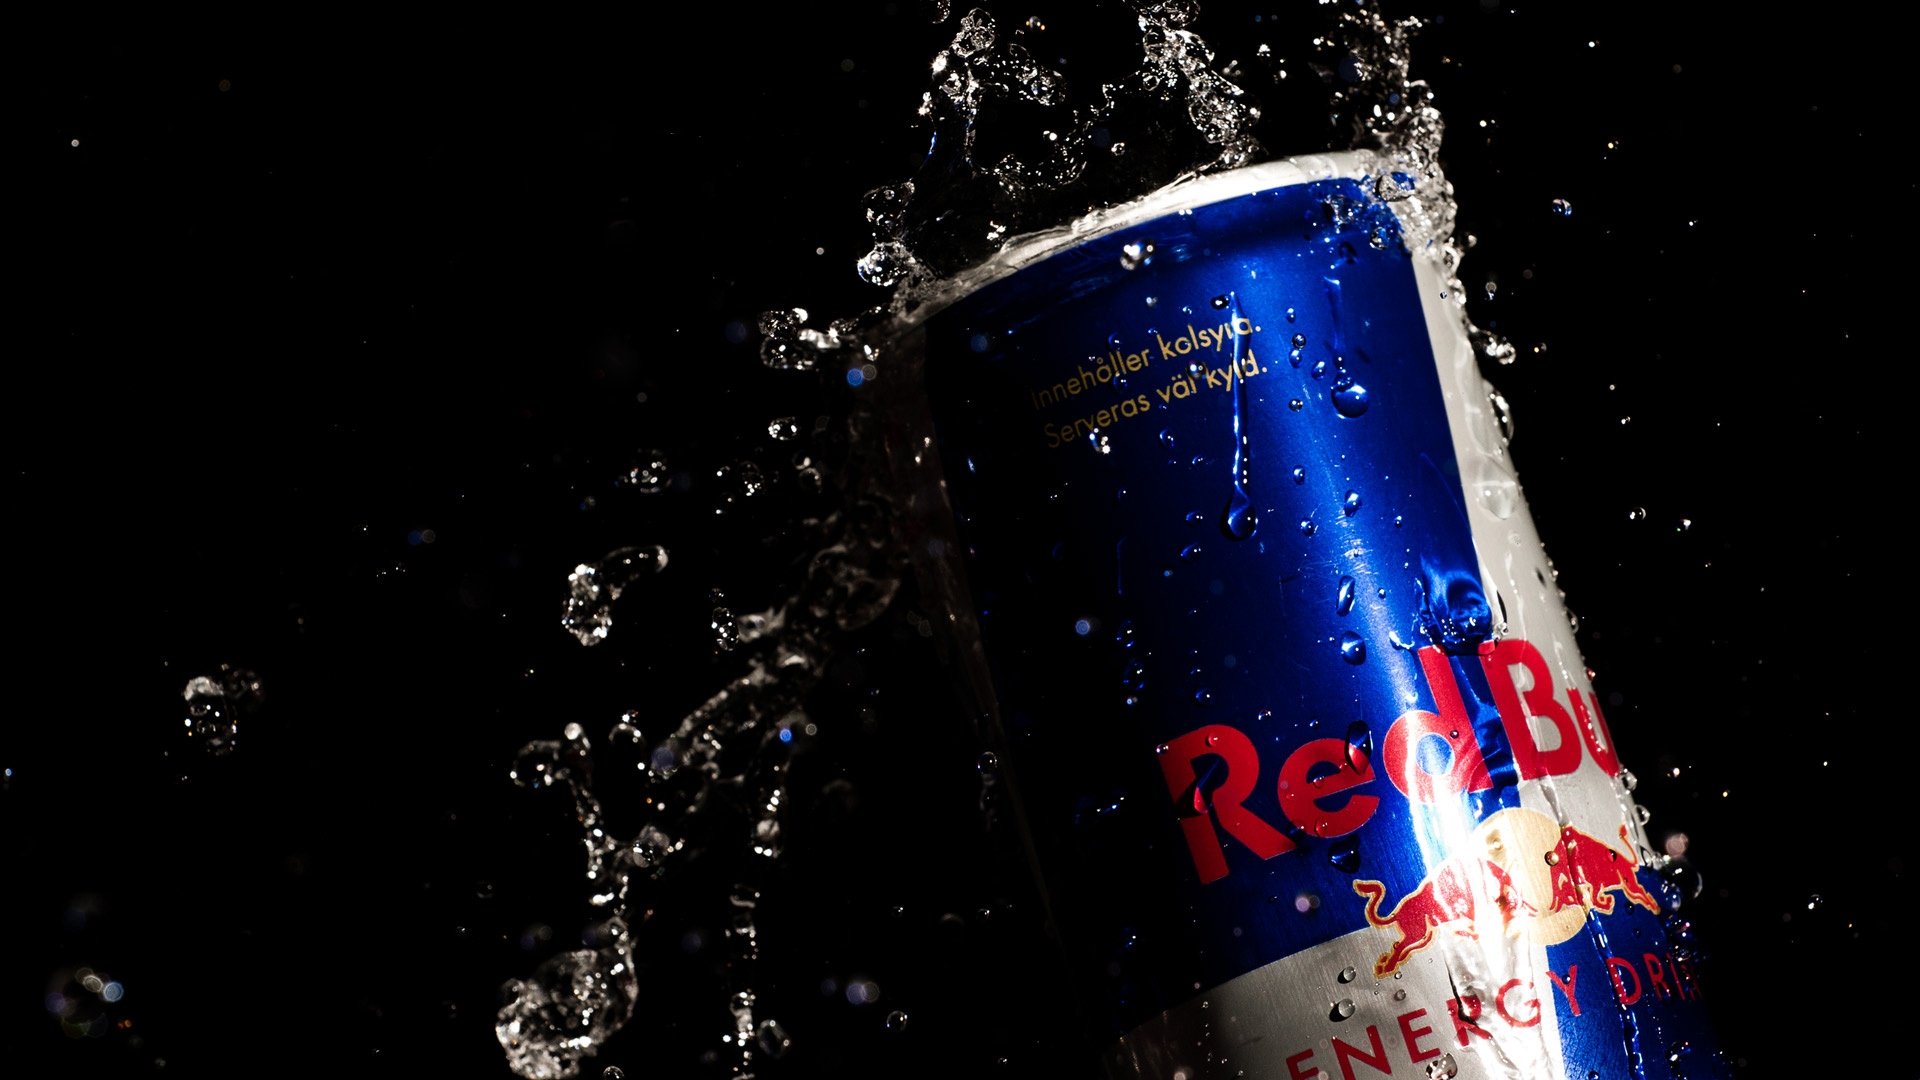 Red Bull Wallpaper. More Free PC Wallpaper for Your Desktop Backgrounds